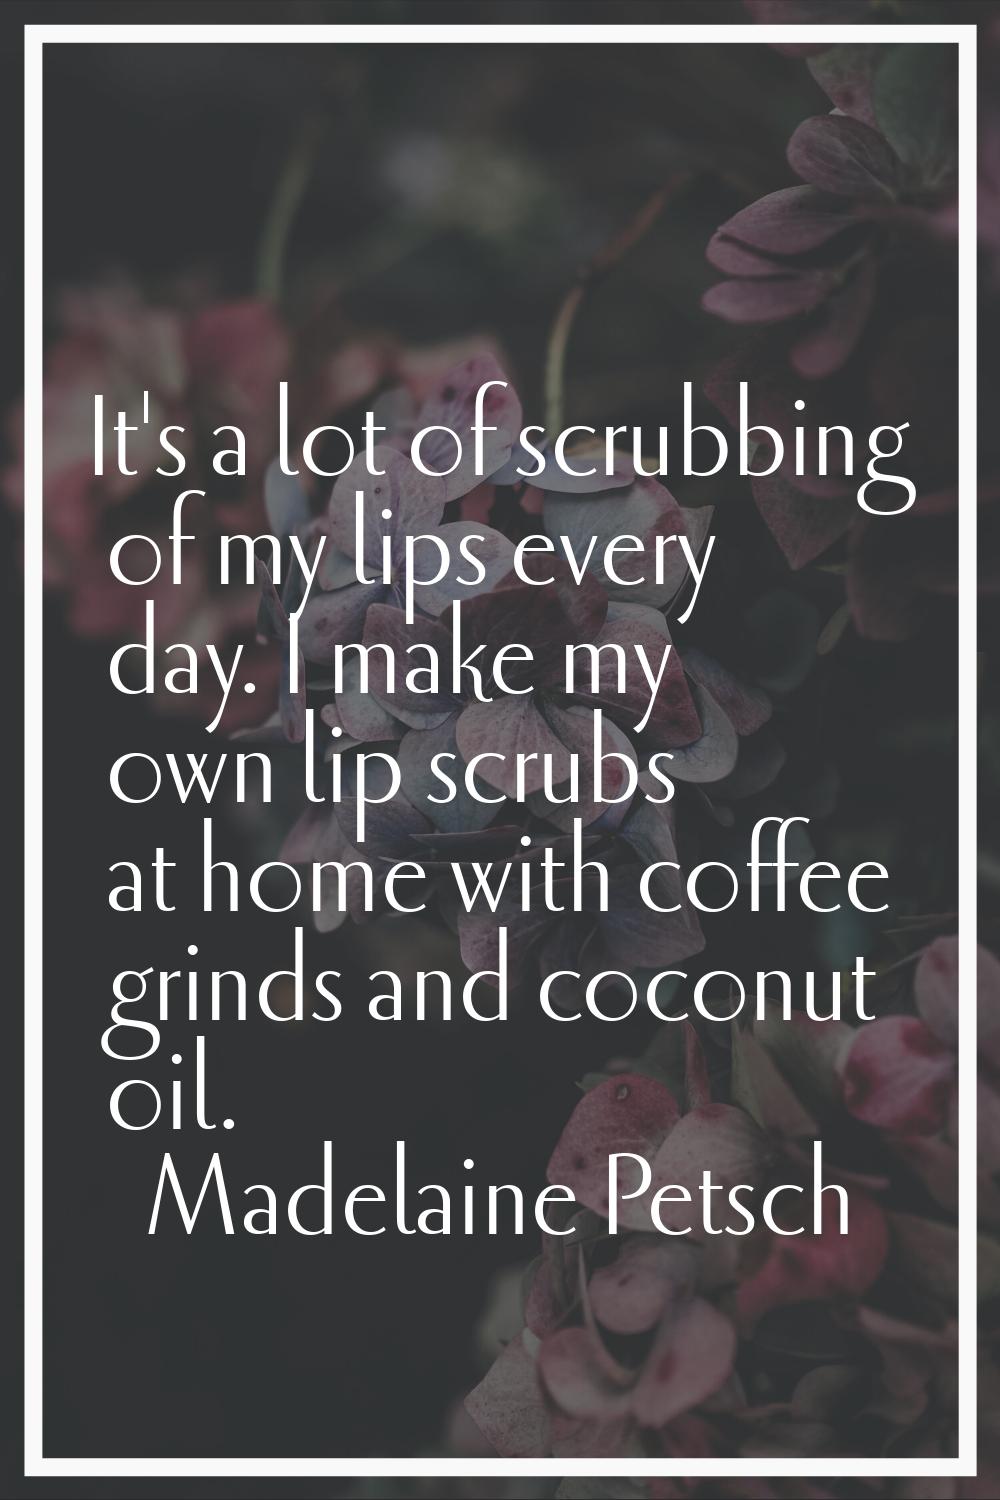 It's a lot of scrubbing of my lips every day. I make my own lip scrubs at home with coffee grinds a